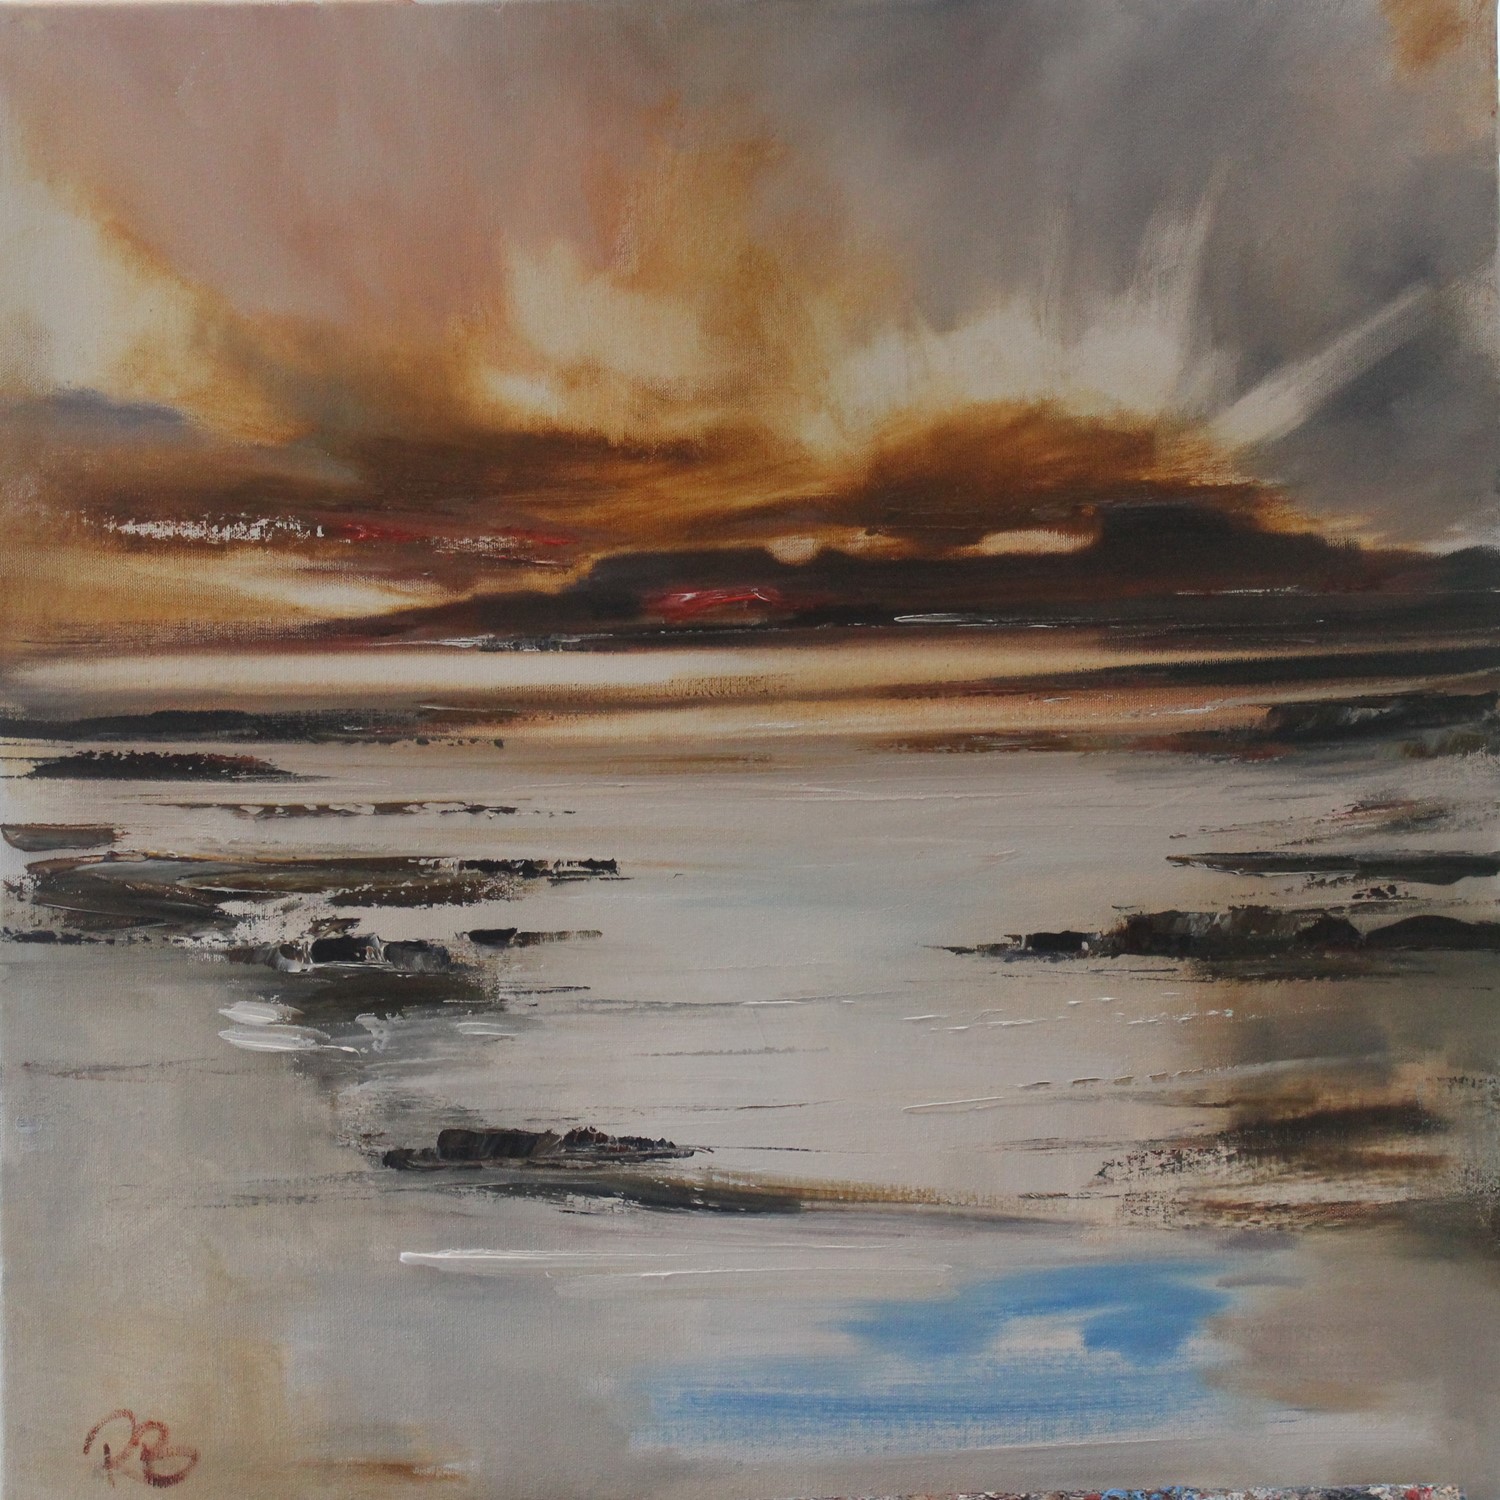 'View from the Shores' by artist Rosanne Barr